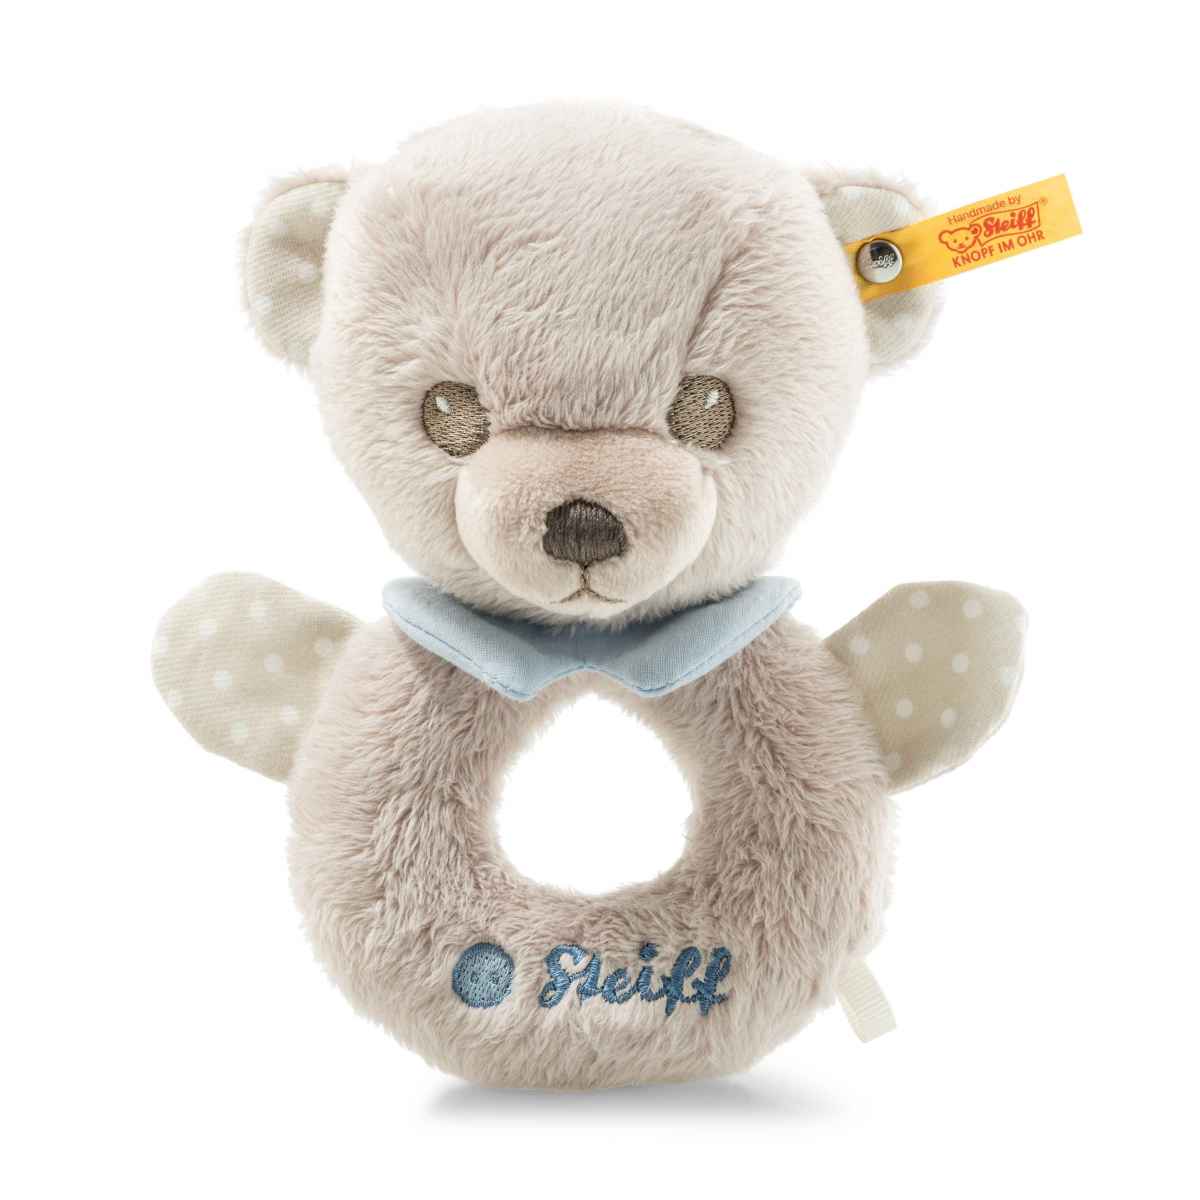 Погремушка Steiff Hello Baby Levi Teddy bear grip toy with rattle in gift box Штайф Мишка glove tackifier for goalkeepers enhance grip with 30ml football glove tackifier strengthening for goalkeeper for performance